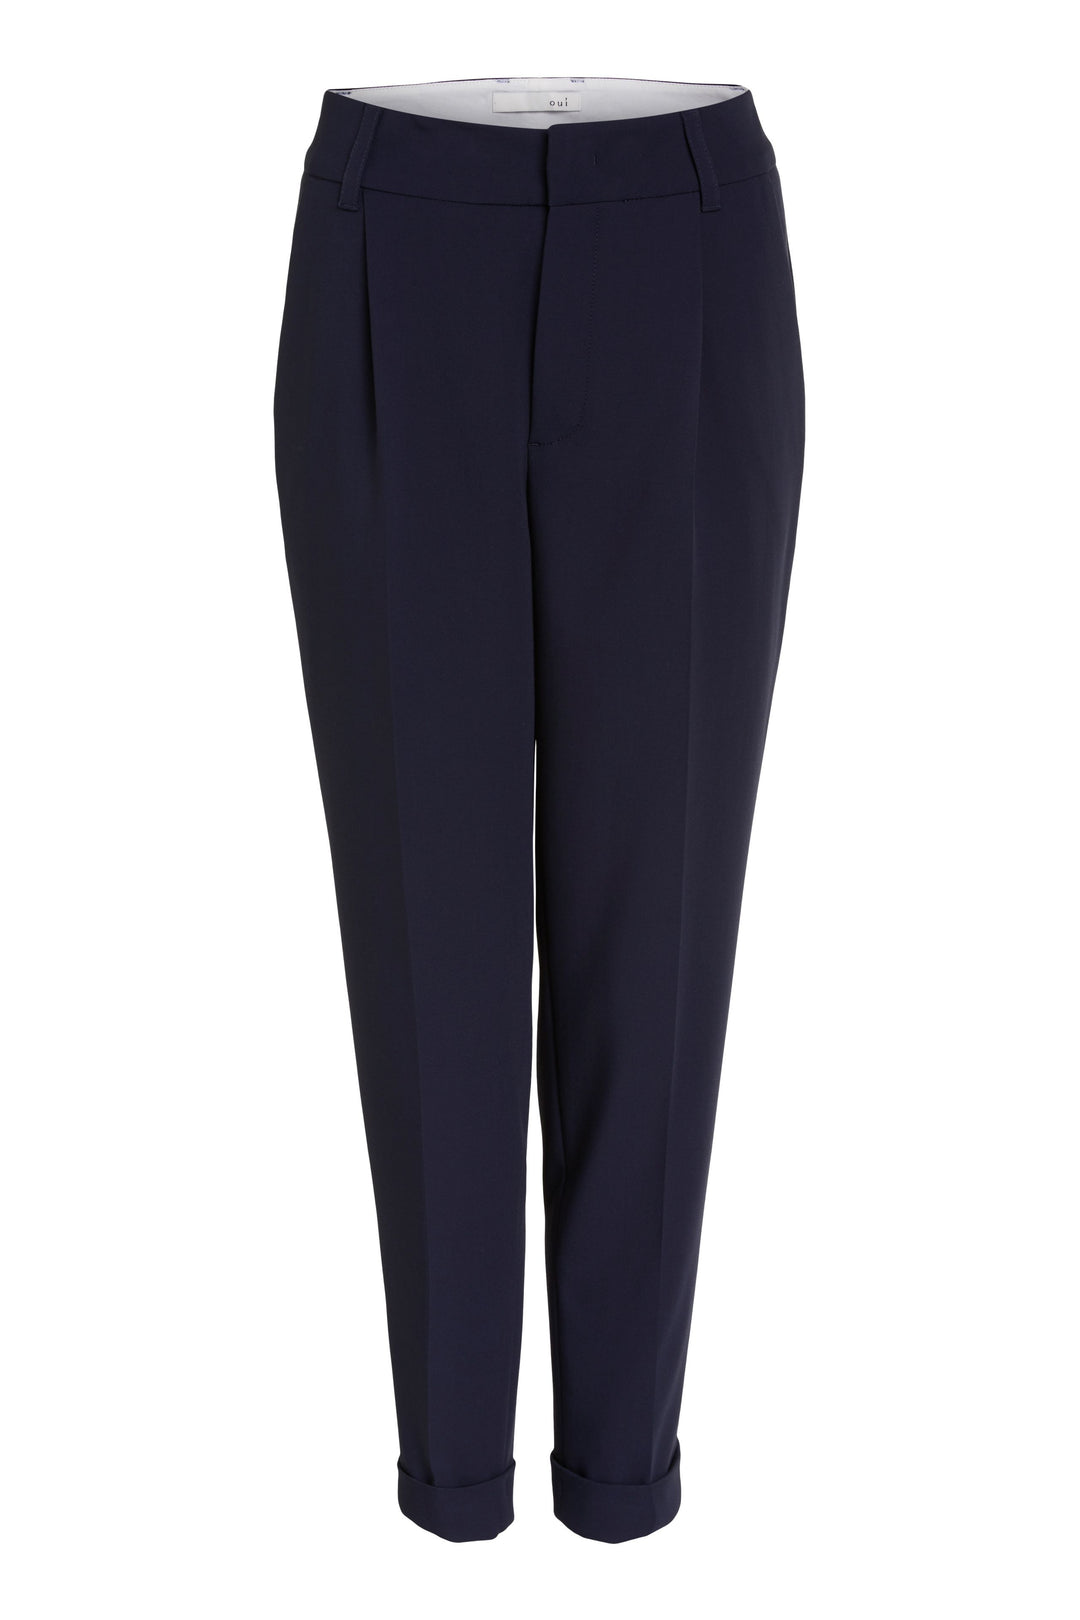 Oui 72712 Navy Trousers Pack Shot | Dotique